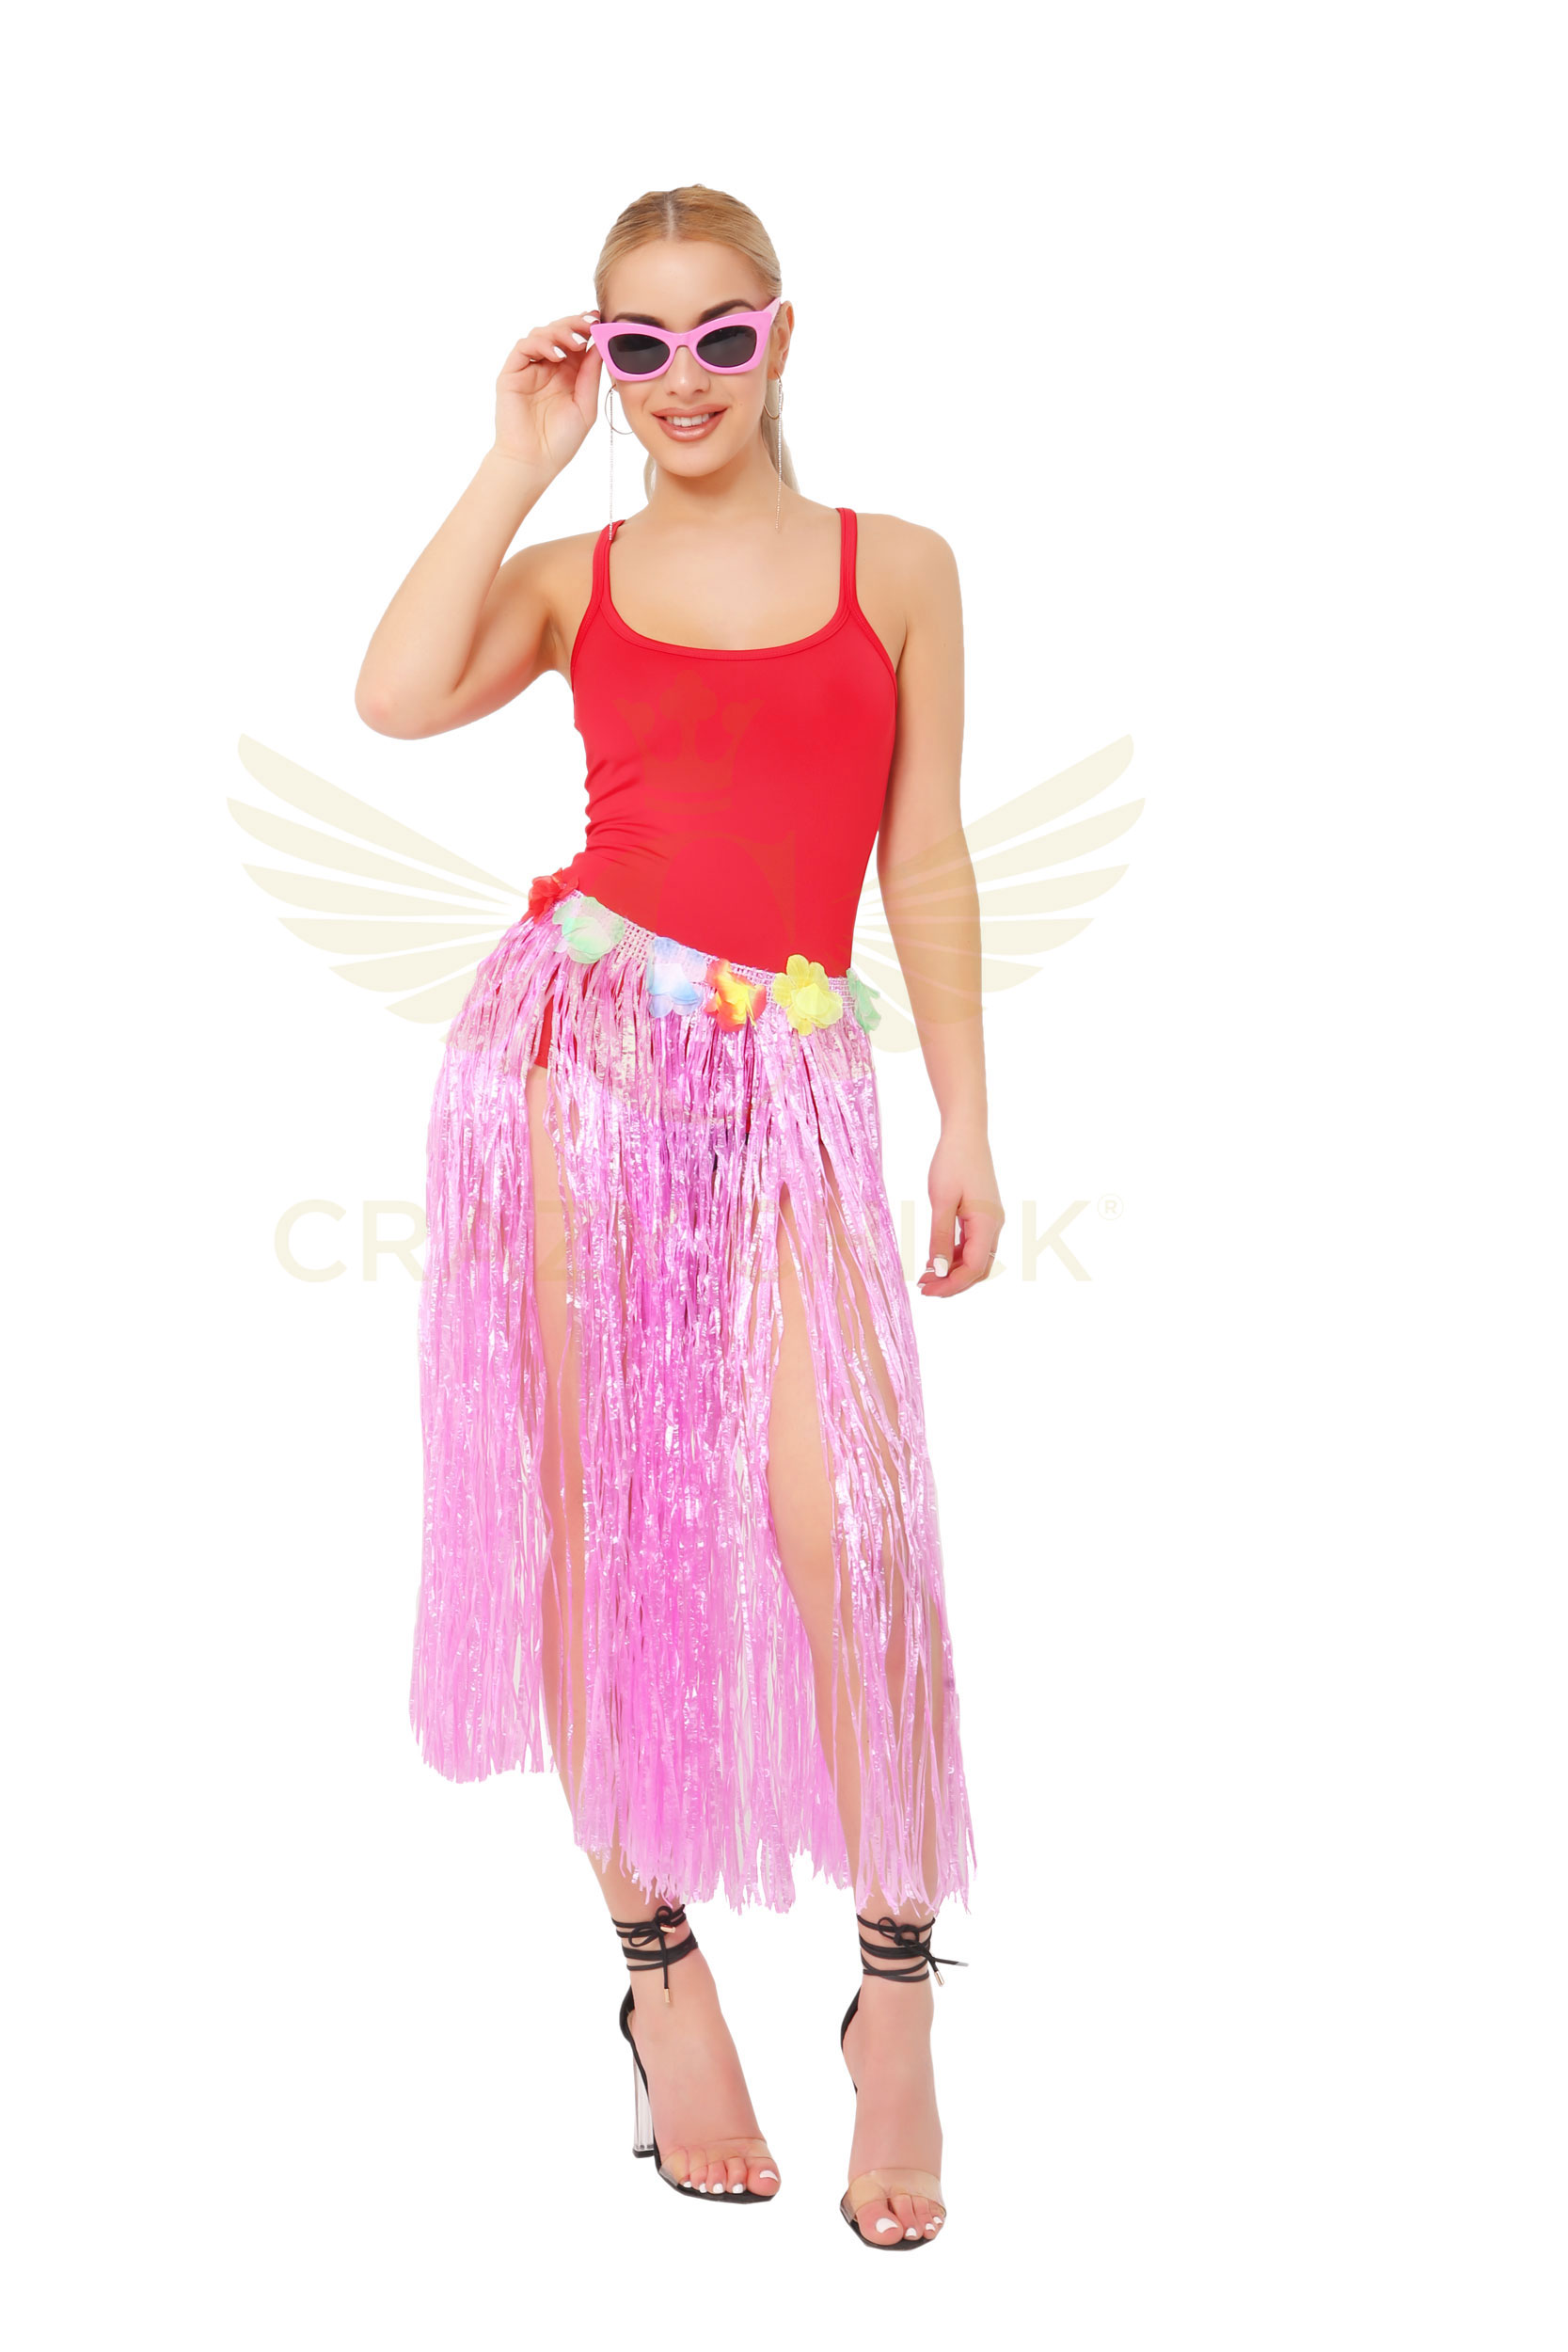 Crazy Chick Adult Pink Hula Skirt with Flowers (80cm)